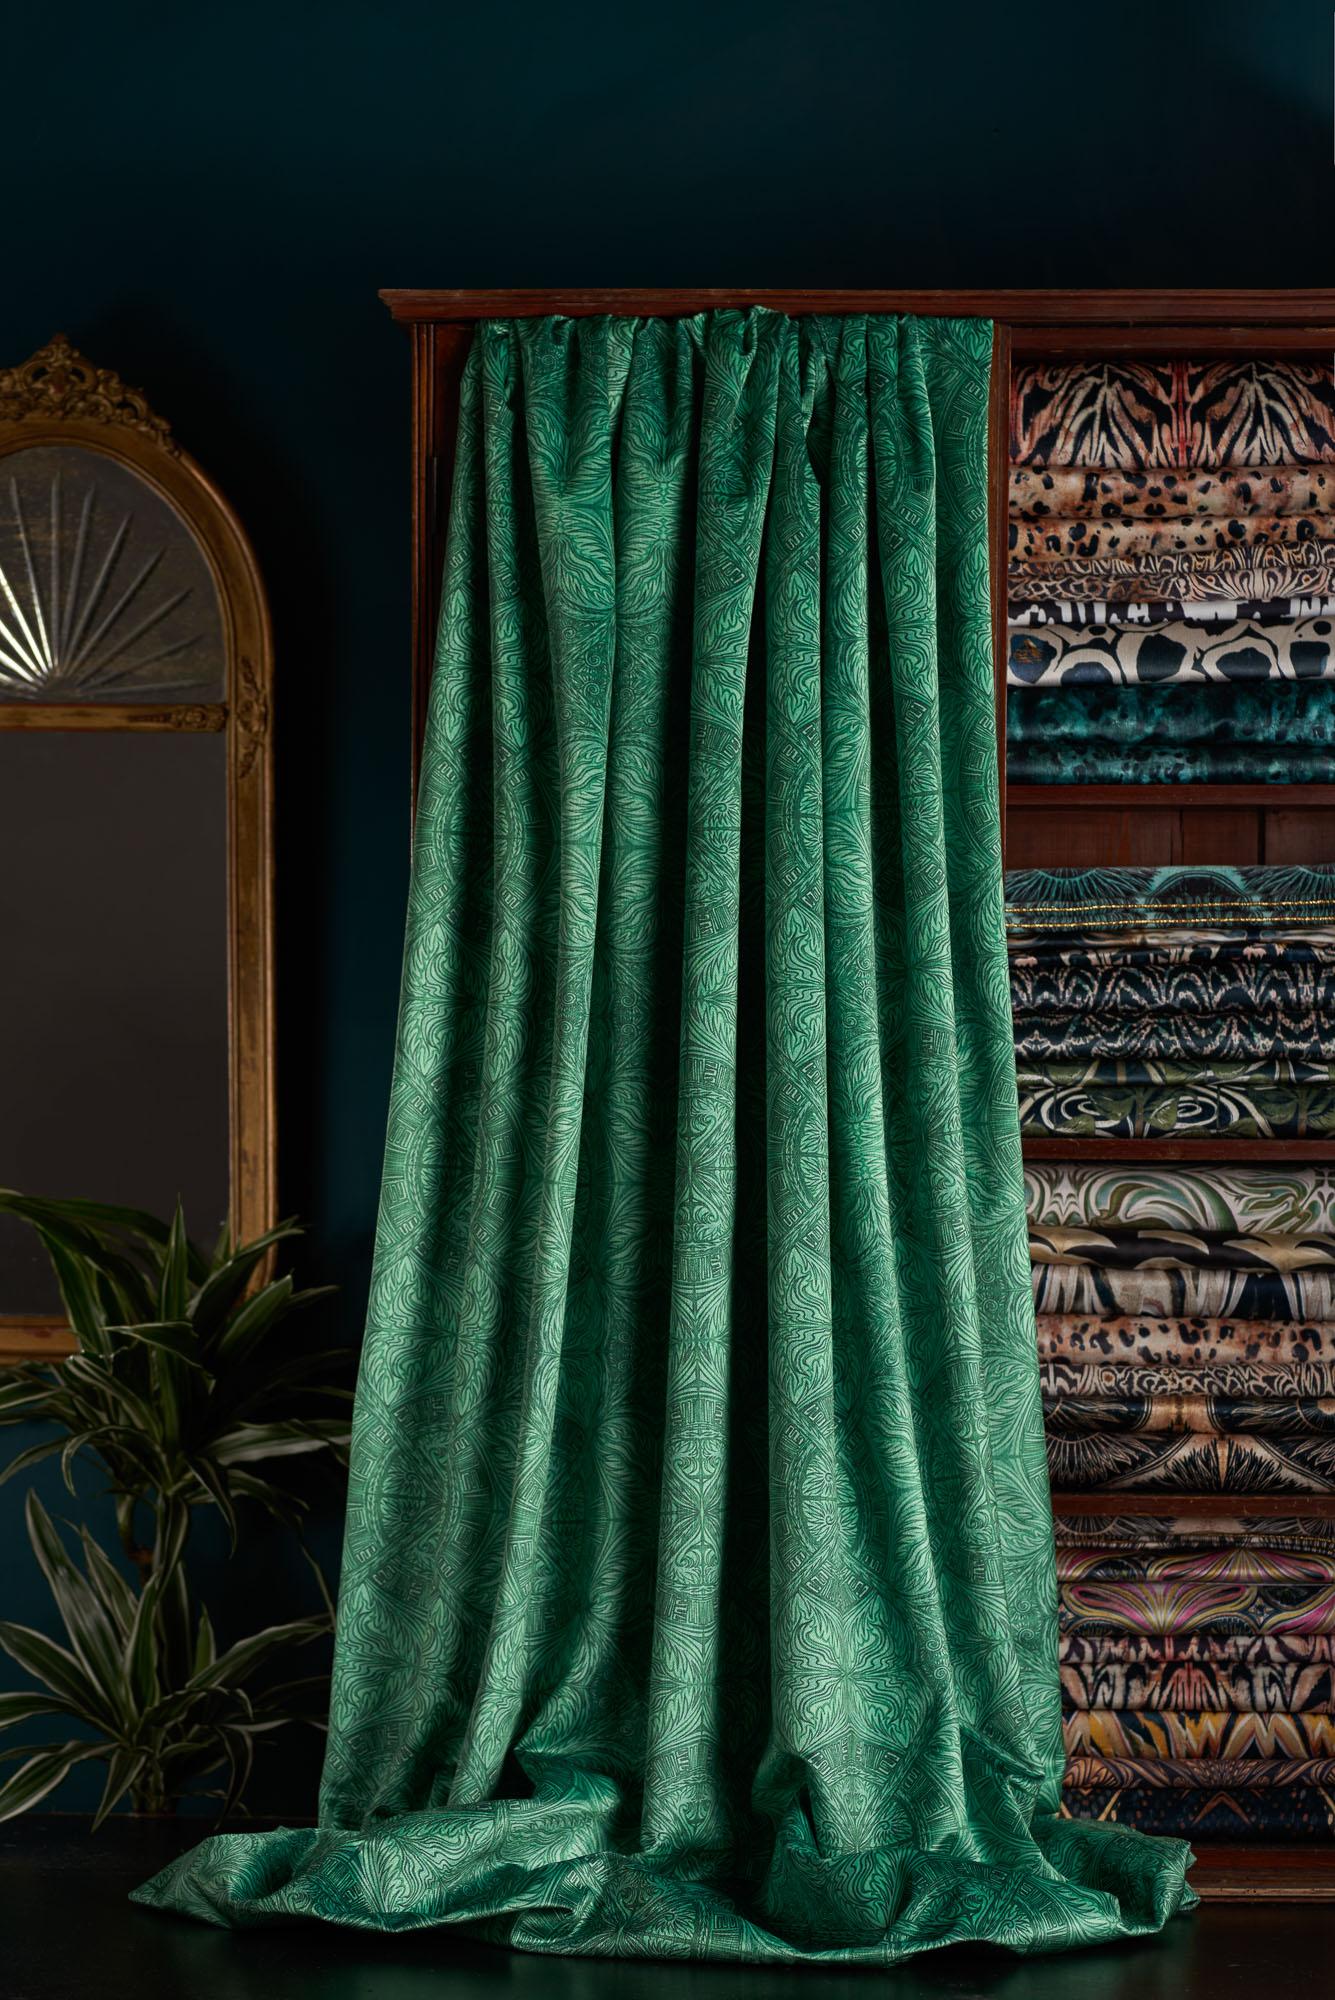 A stunning emerald green design. Lionheart brings detail and impact with this gorgeous velvet, the colour is truly vibrant and would make a real hero of the room be it on curtains, cushions or upholstery. The intricate design includes elements of